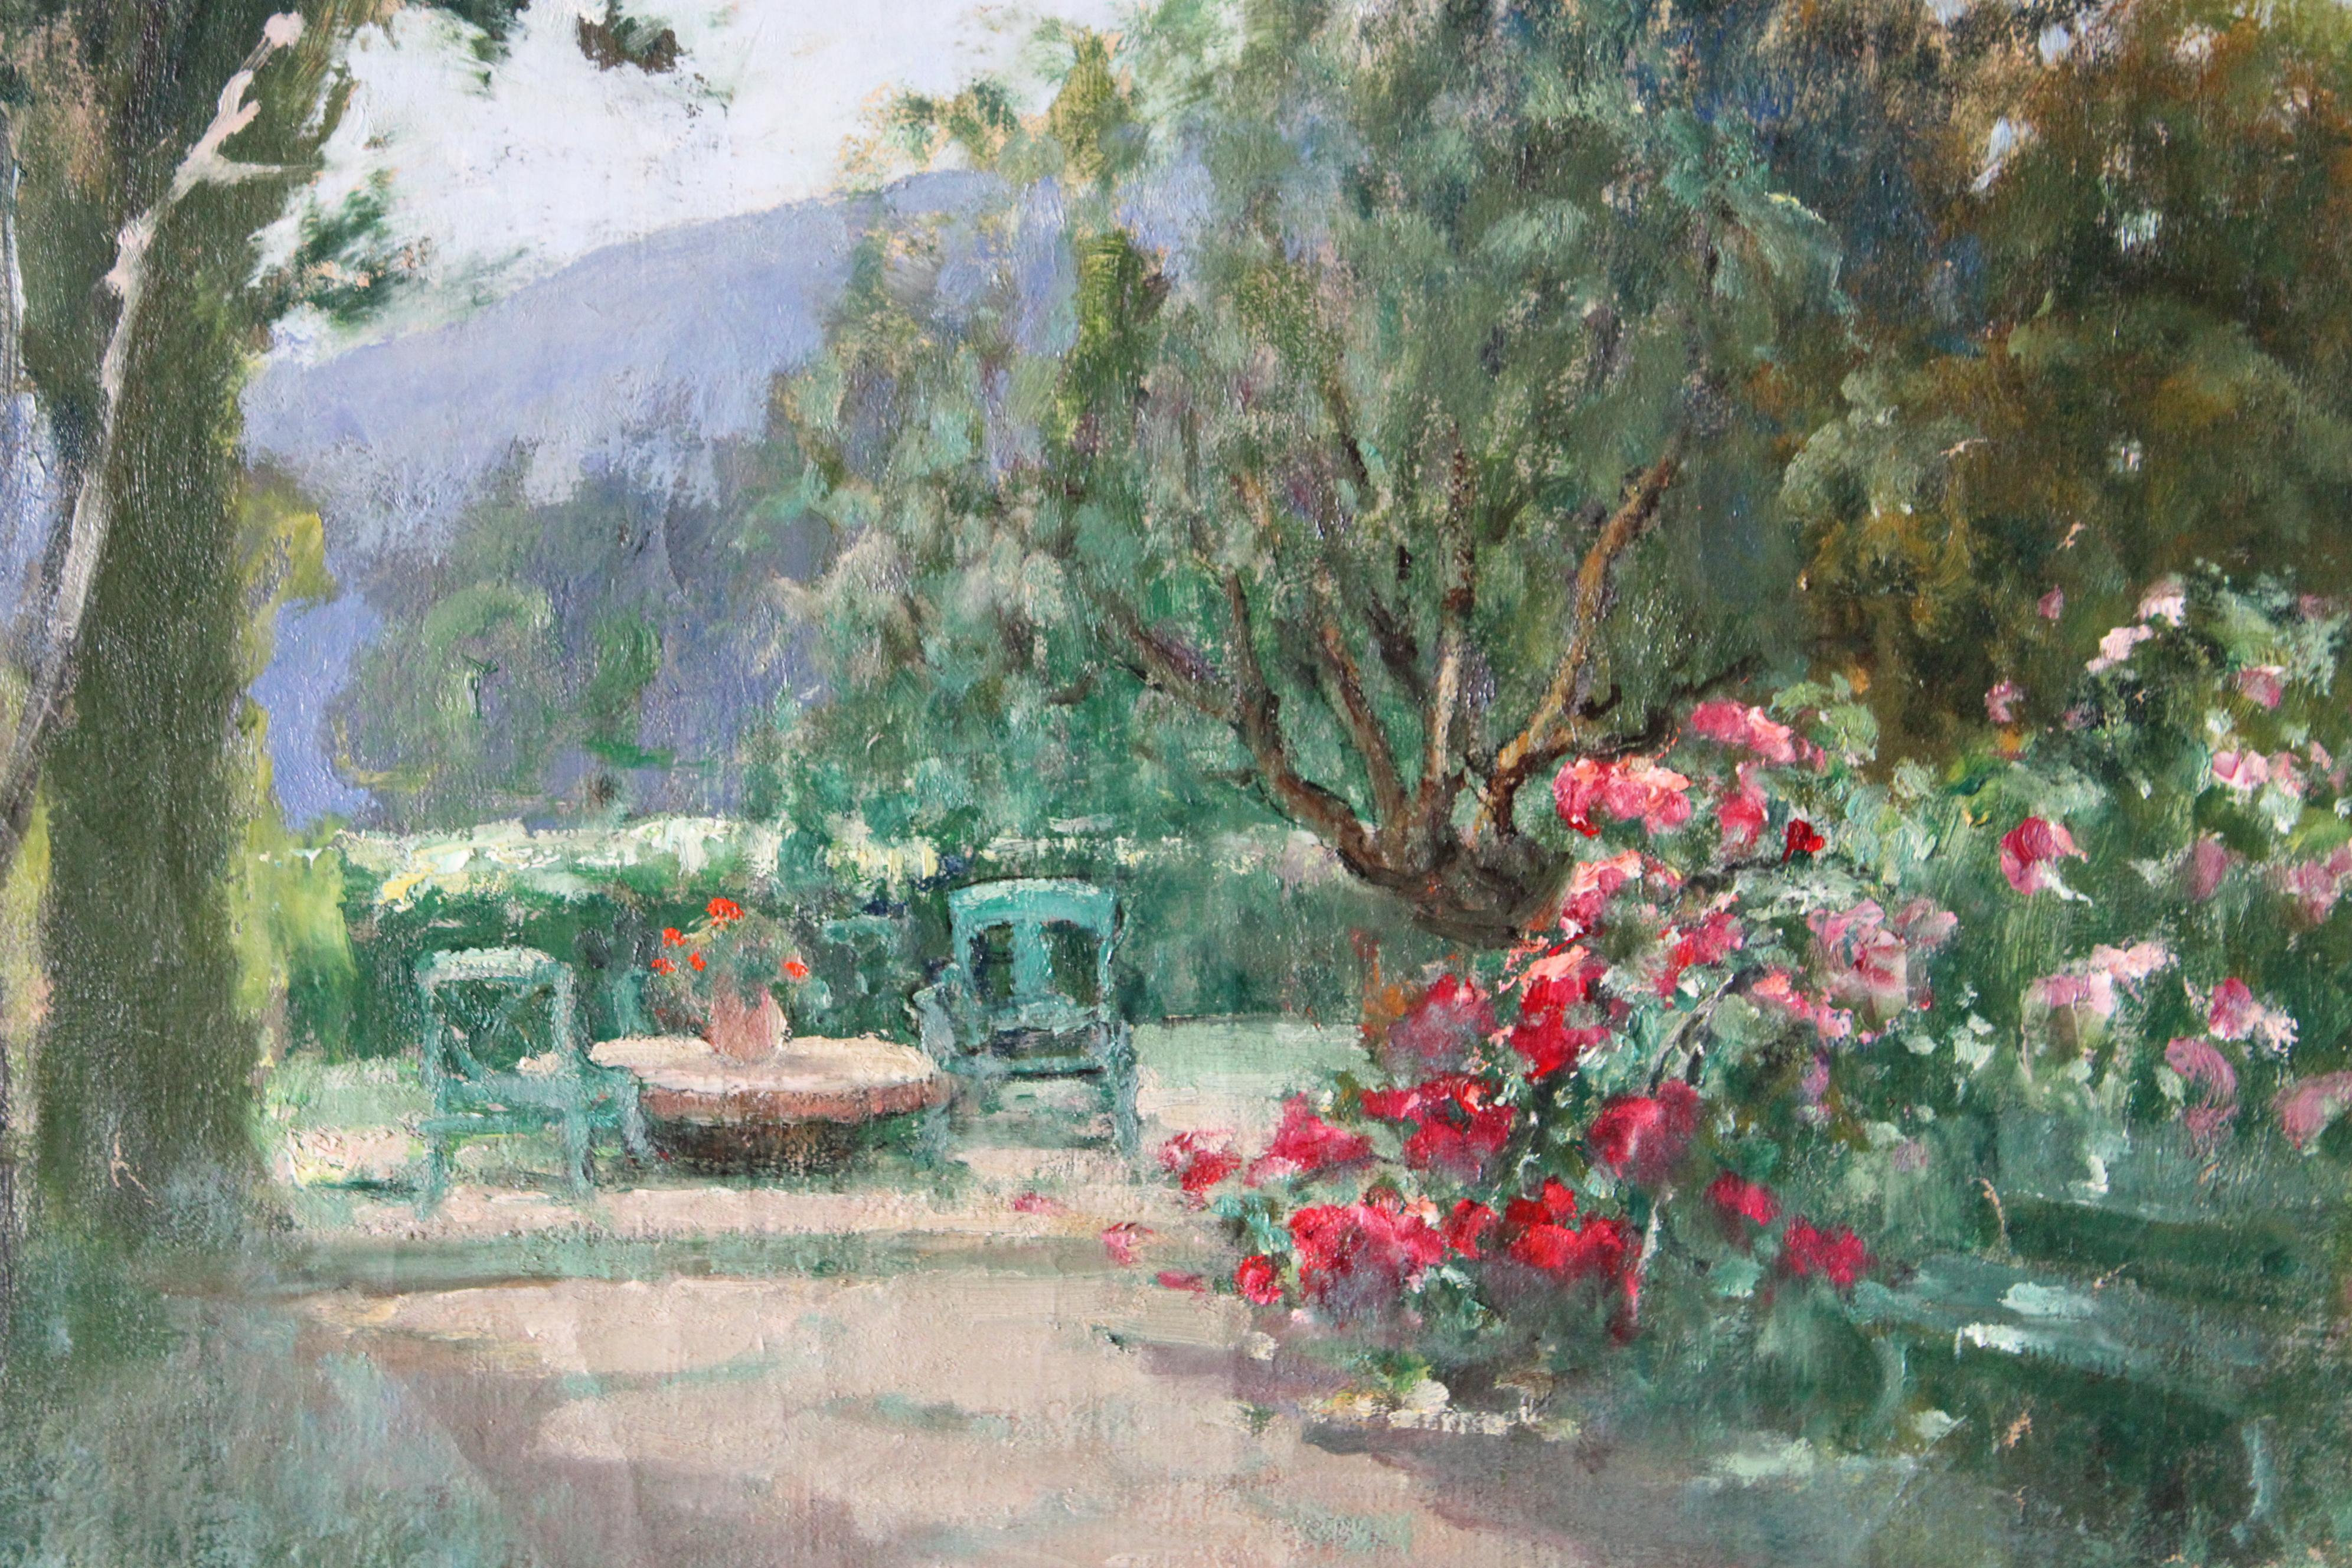 Vintage landscape oil painting on canvas by French artist Marie Marguerite Reol (1880-1963) Garden landscape in the fore with a backdrop of mountains, most likely to be the Pyrenees. 
The canvas is textured to the touch with some elements, such as